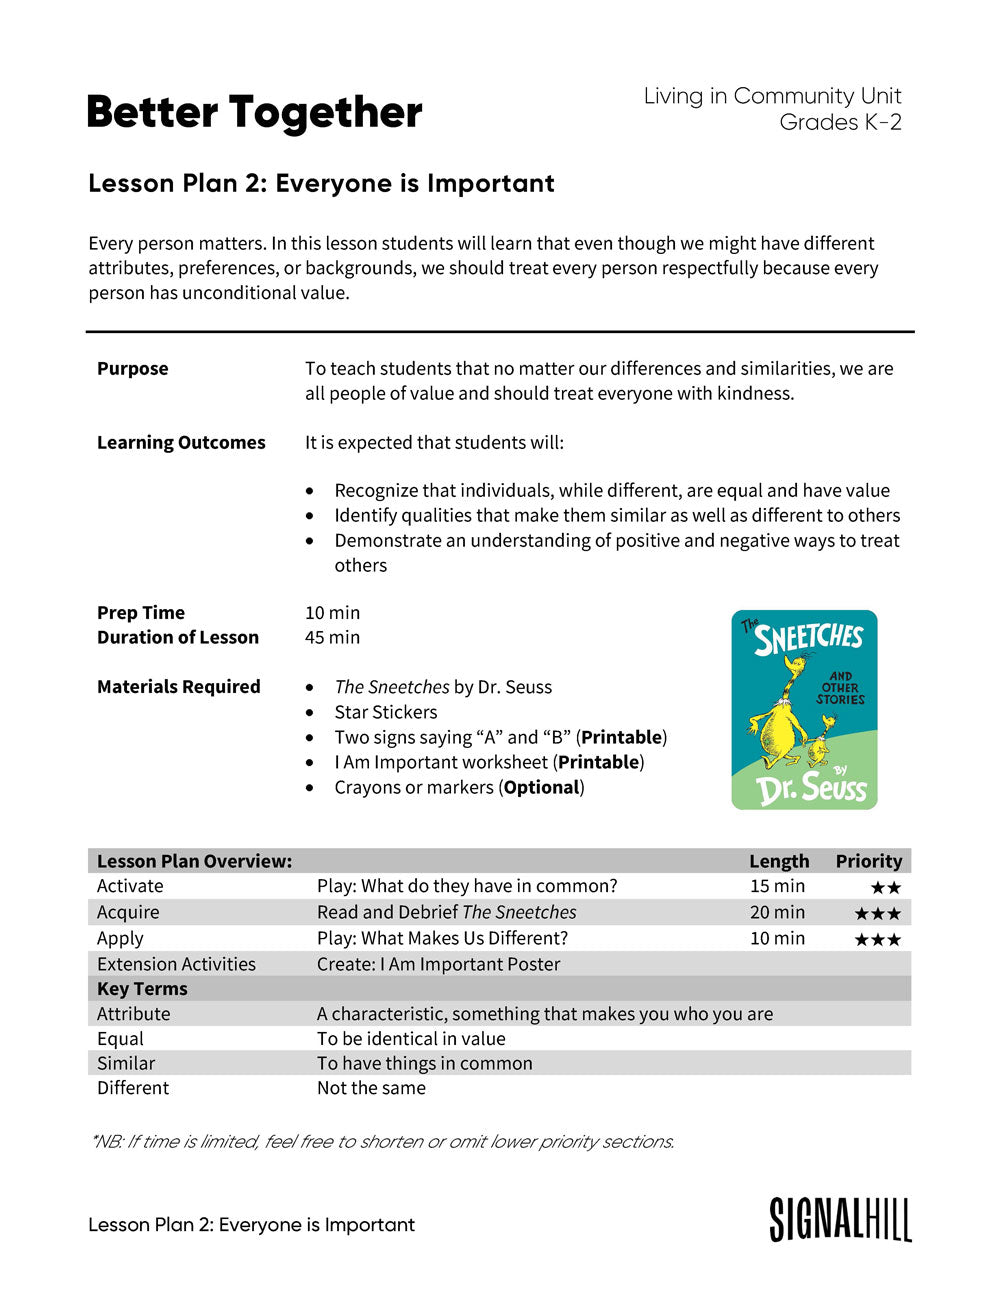 Lesson Plan 2: Everyone is Important